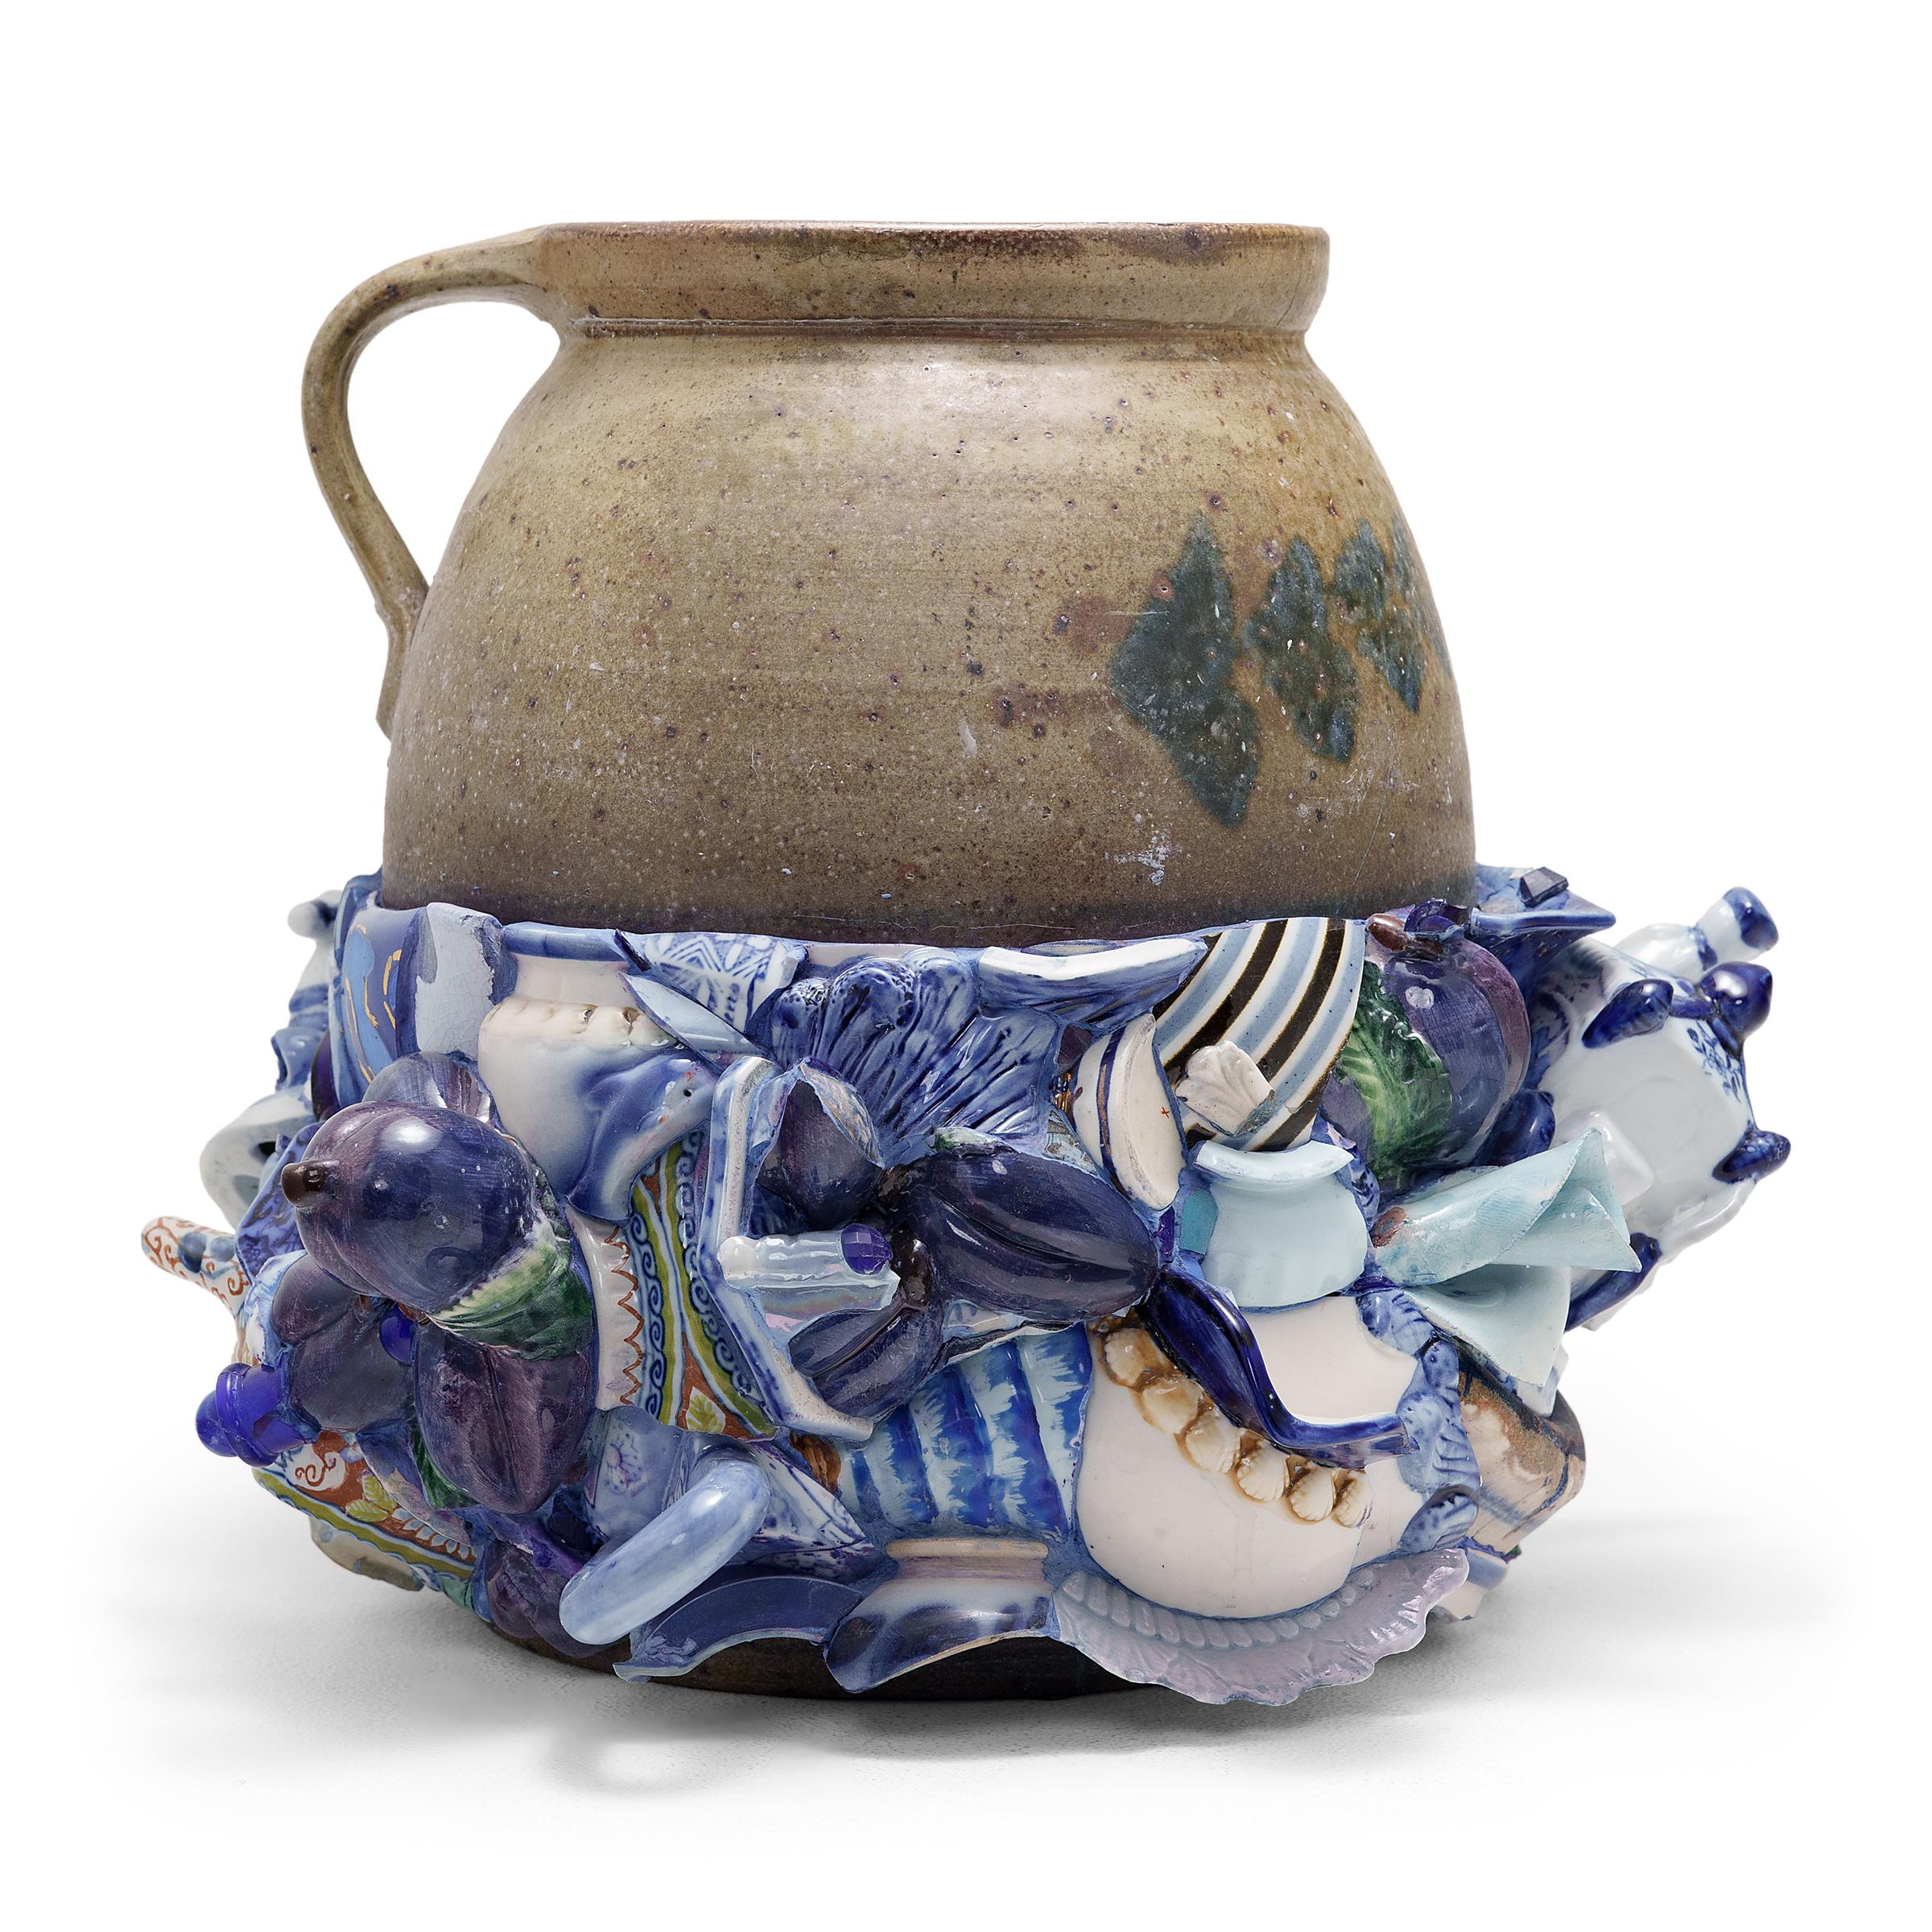 Based in Chicago, IL, contemporary artist Michael Thompson creates unique kites, collages and mixed media works assembled from material fragments of past and present collected in his travels. In his ongoing series of memory jugs, Thompson adorns